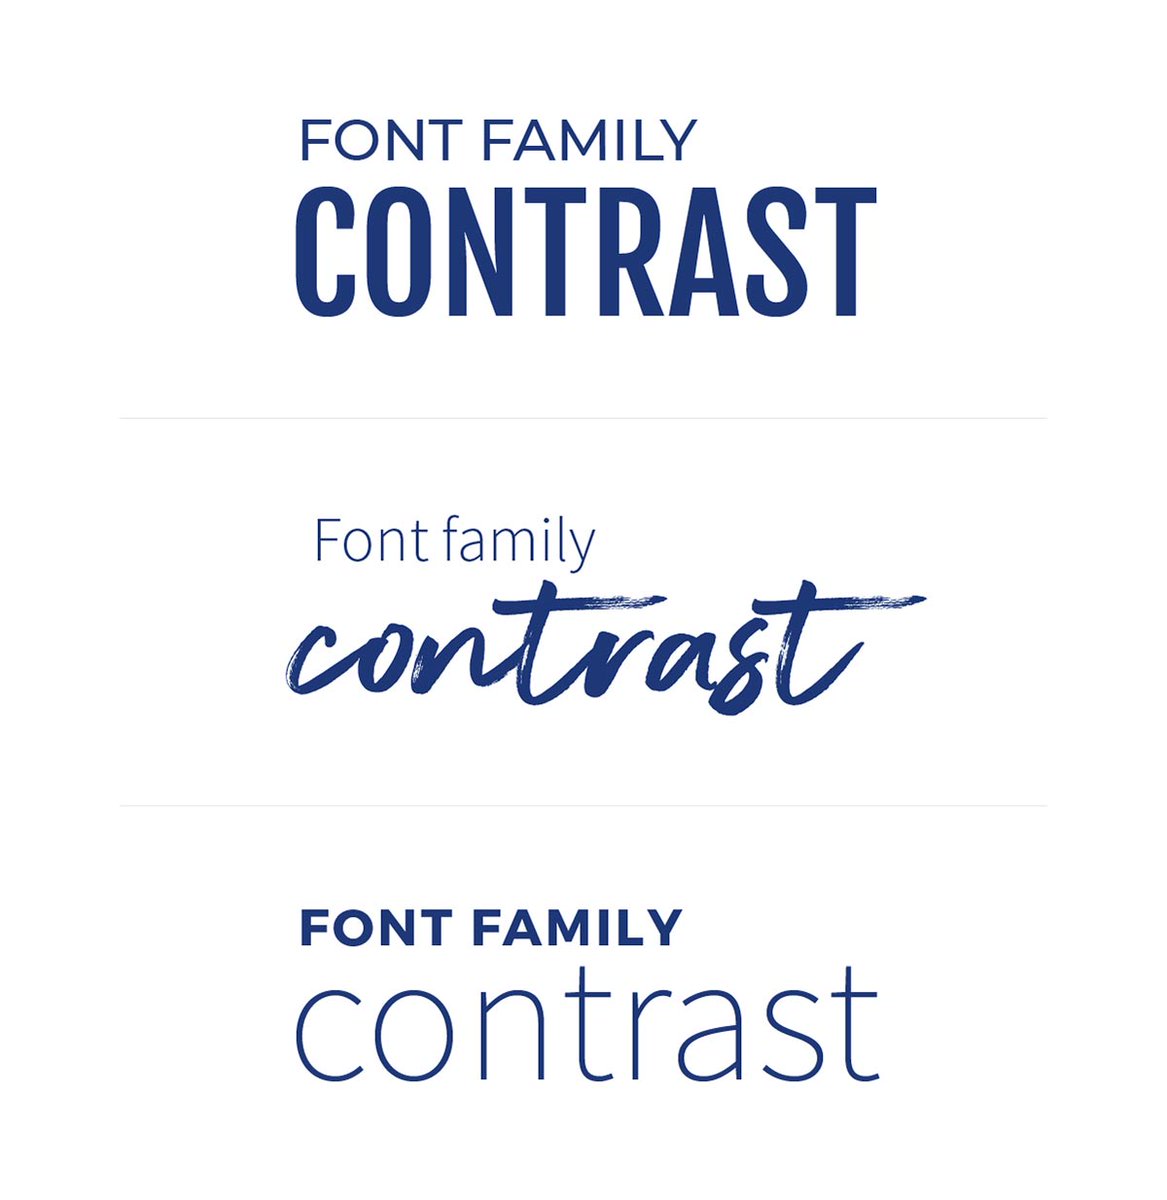 @graphics_mpk Designing Tip of the day: Always use contrasting fonts The main goal of every design is to capture attention. Pairing two contrasting fonts like bold sans serif and cursive will instantly make your image stand out. mpk-graphics.com